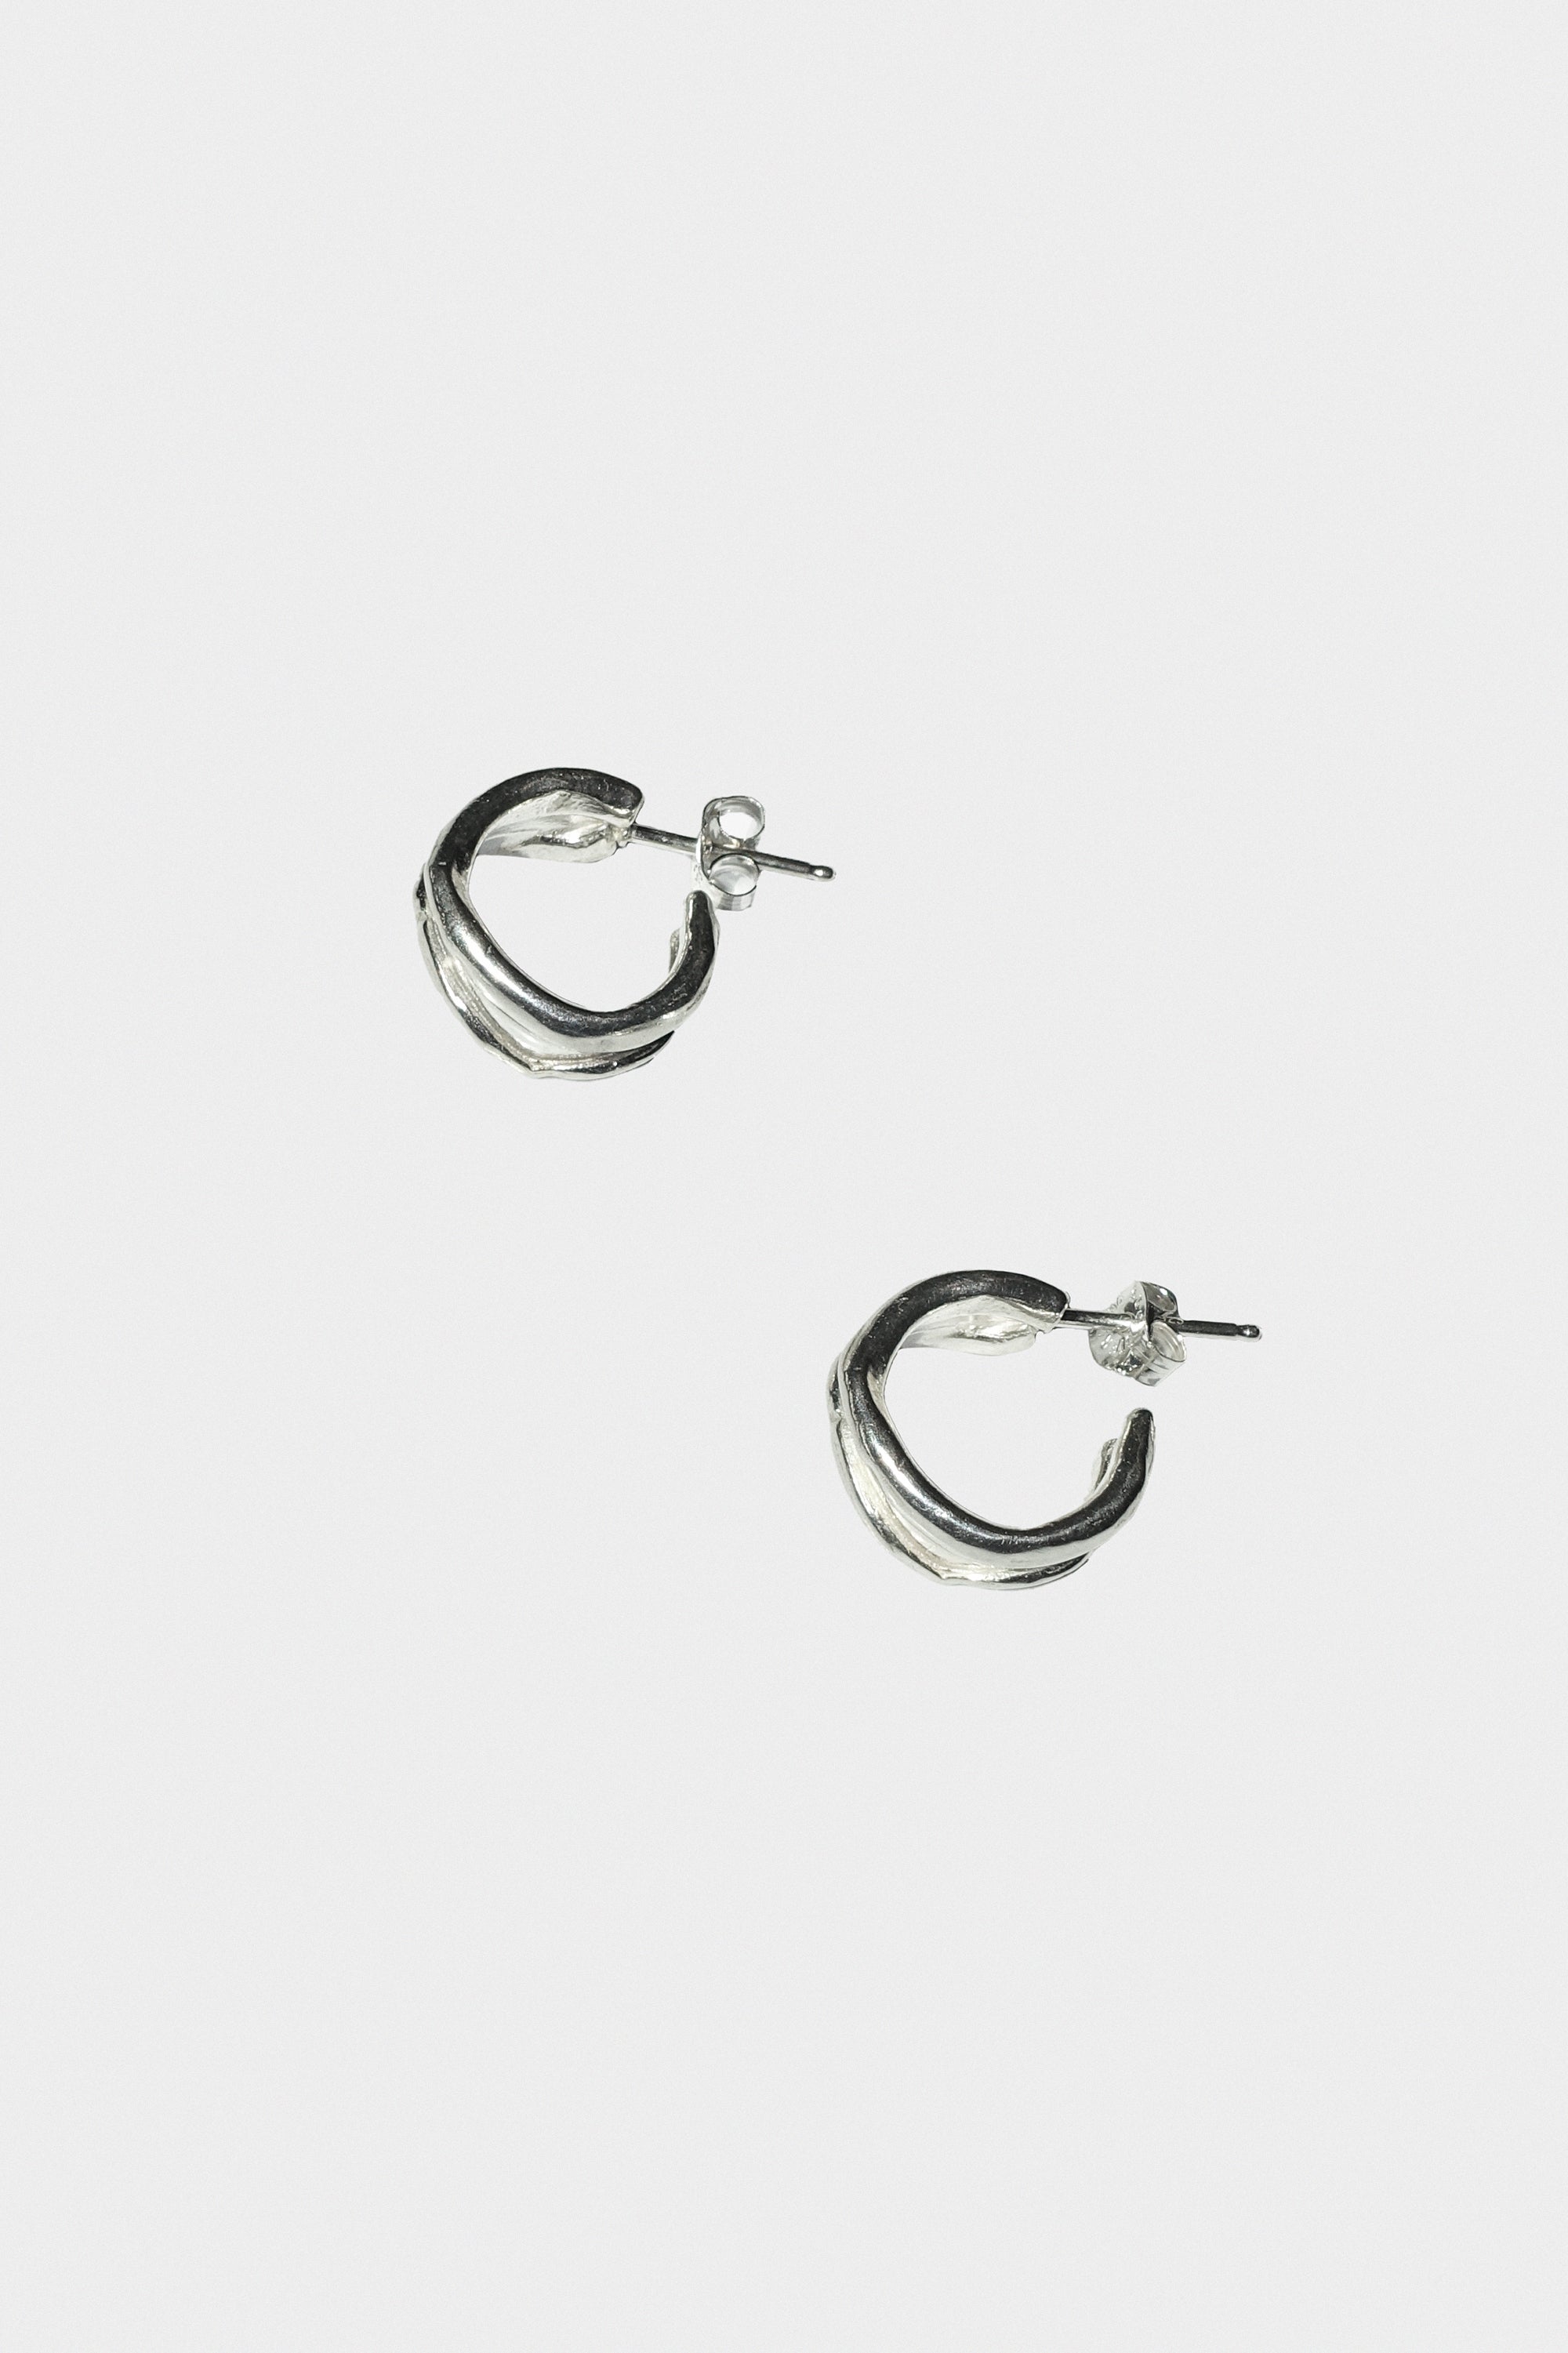 Fluvial Hoops in Sterling Silver by Oxbow